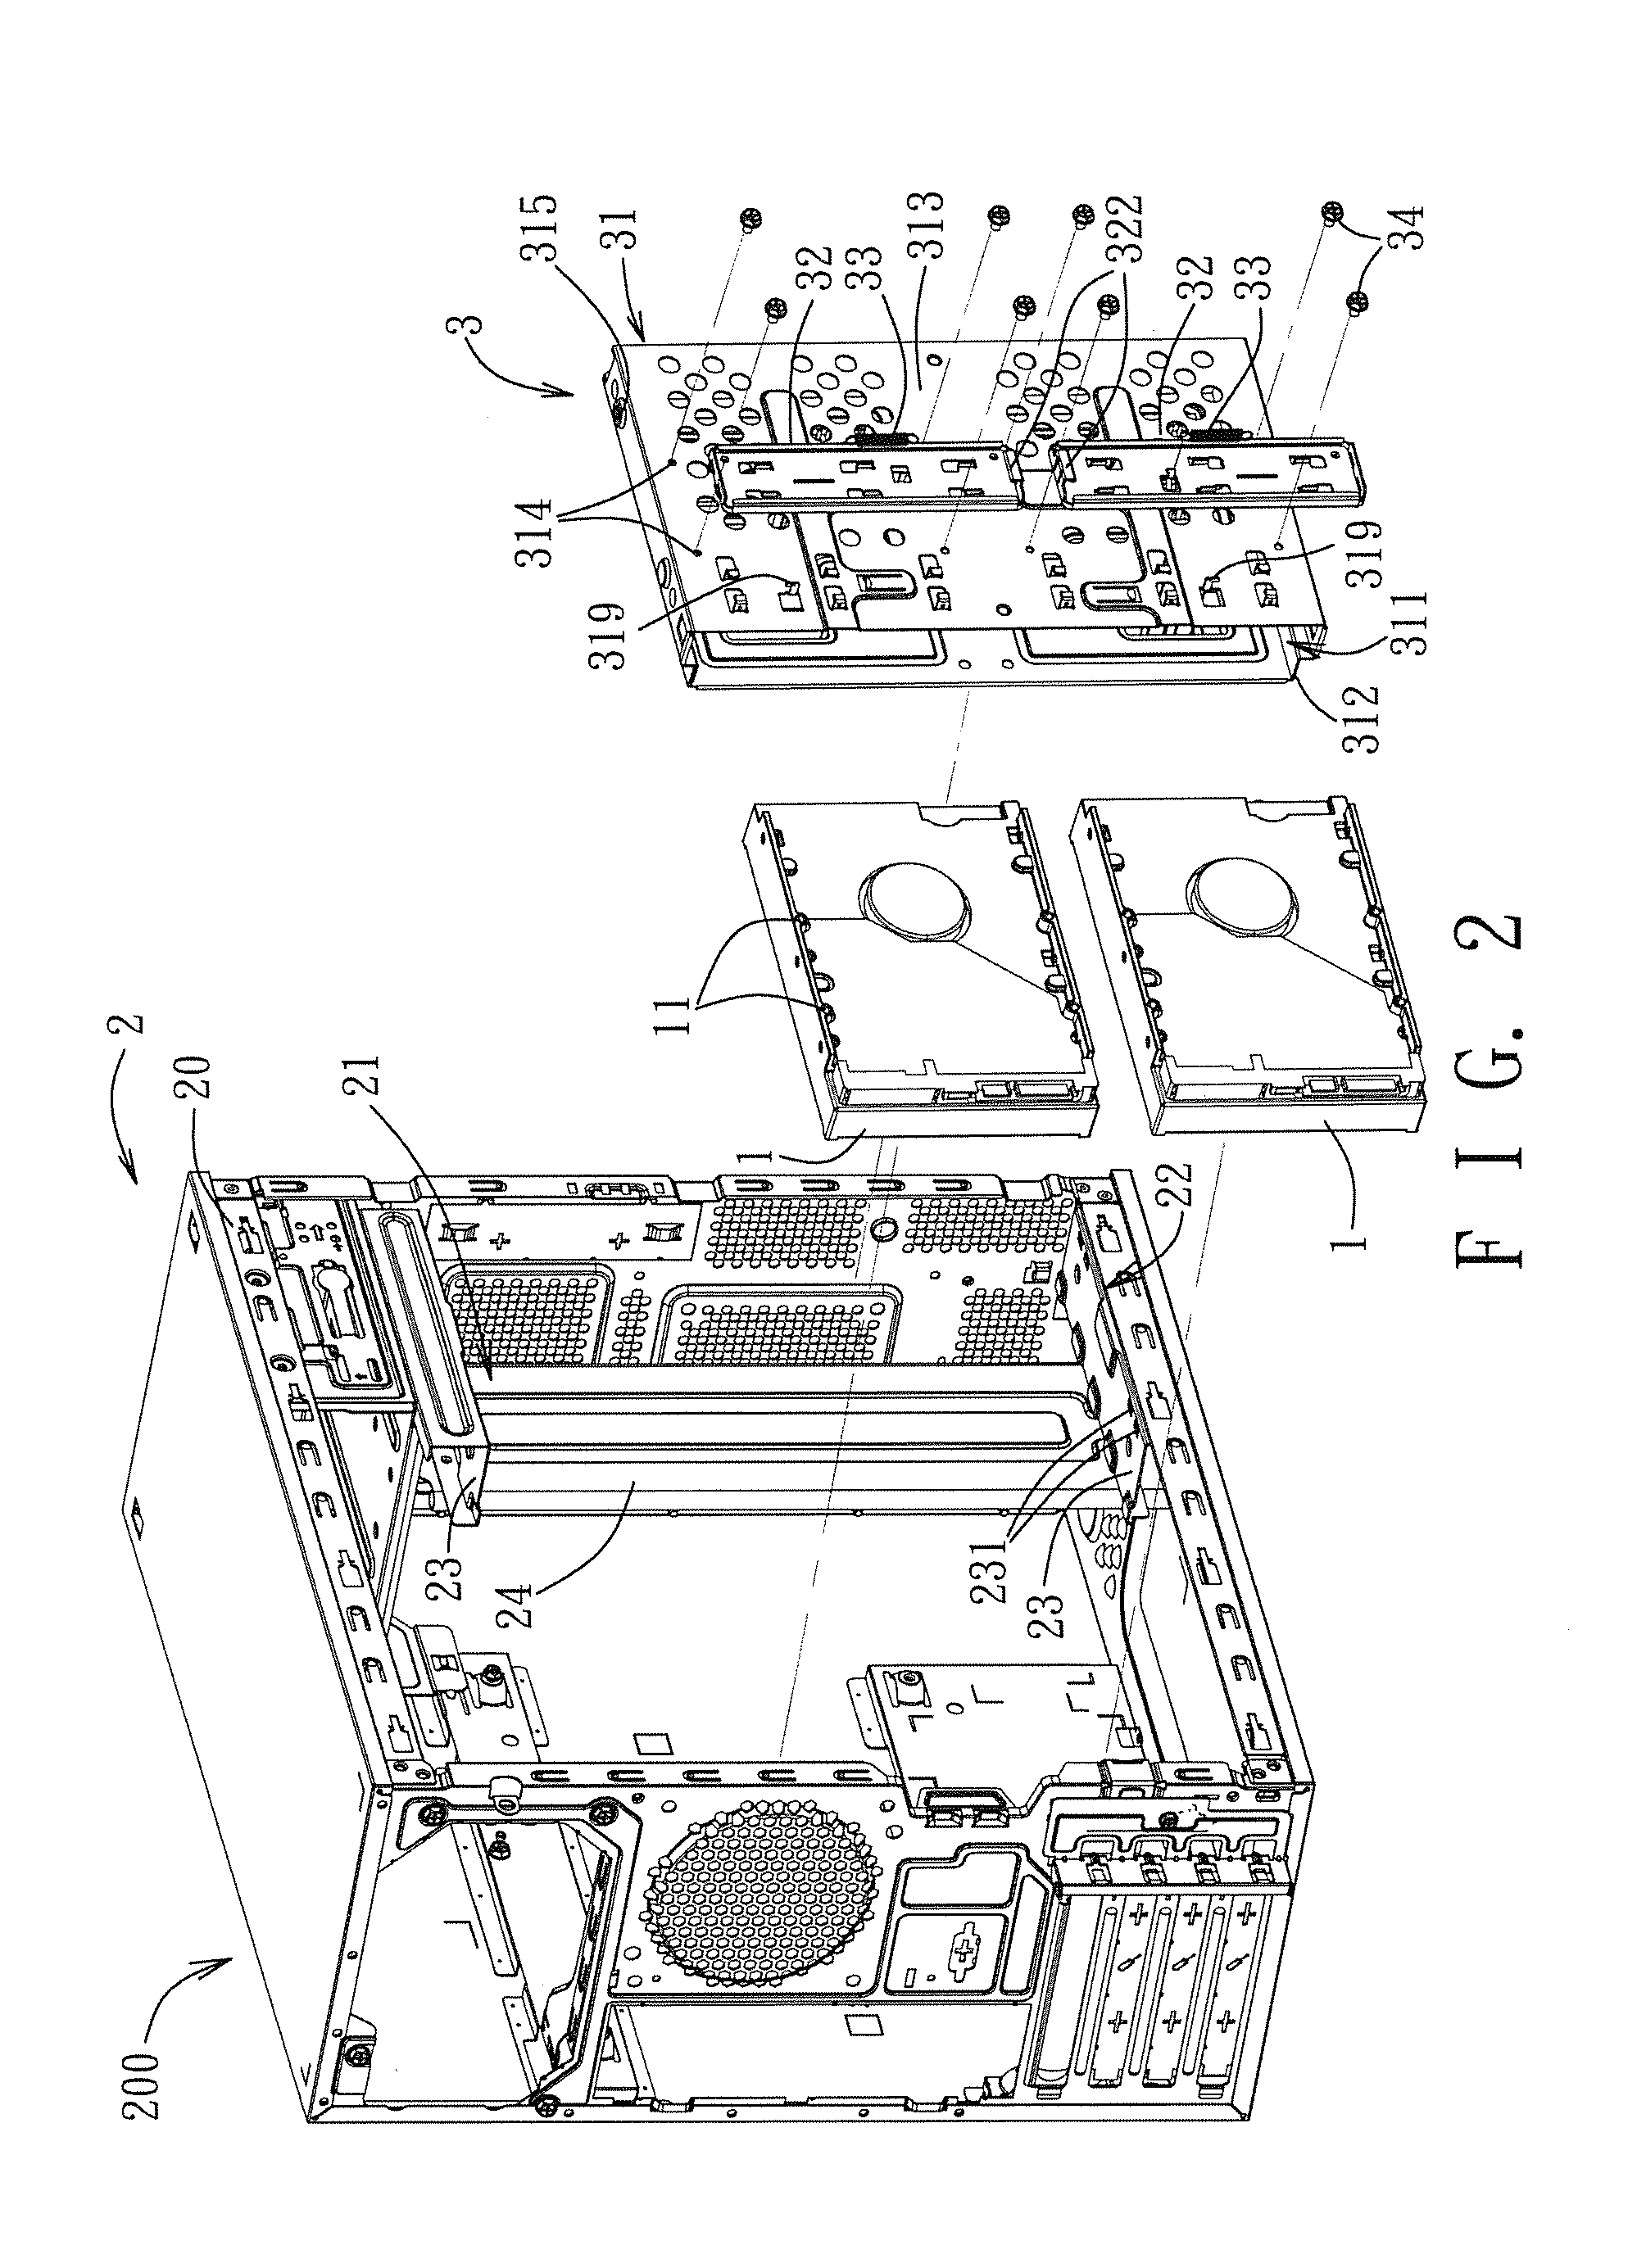 Housing having a carrier device